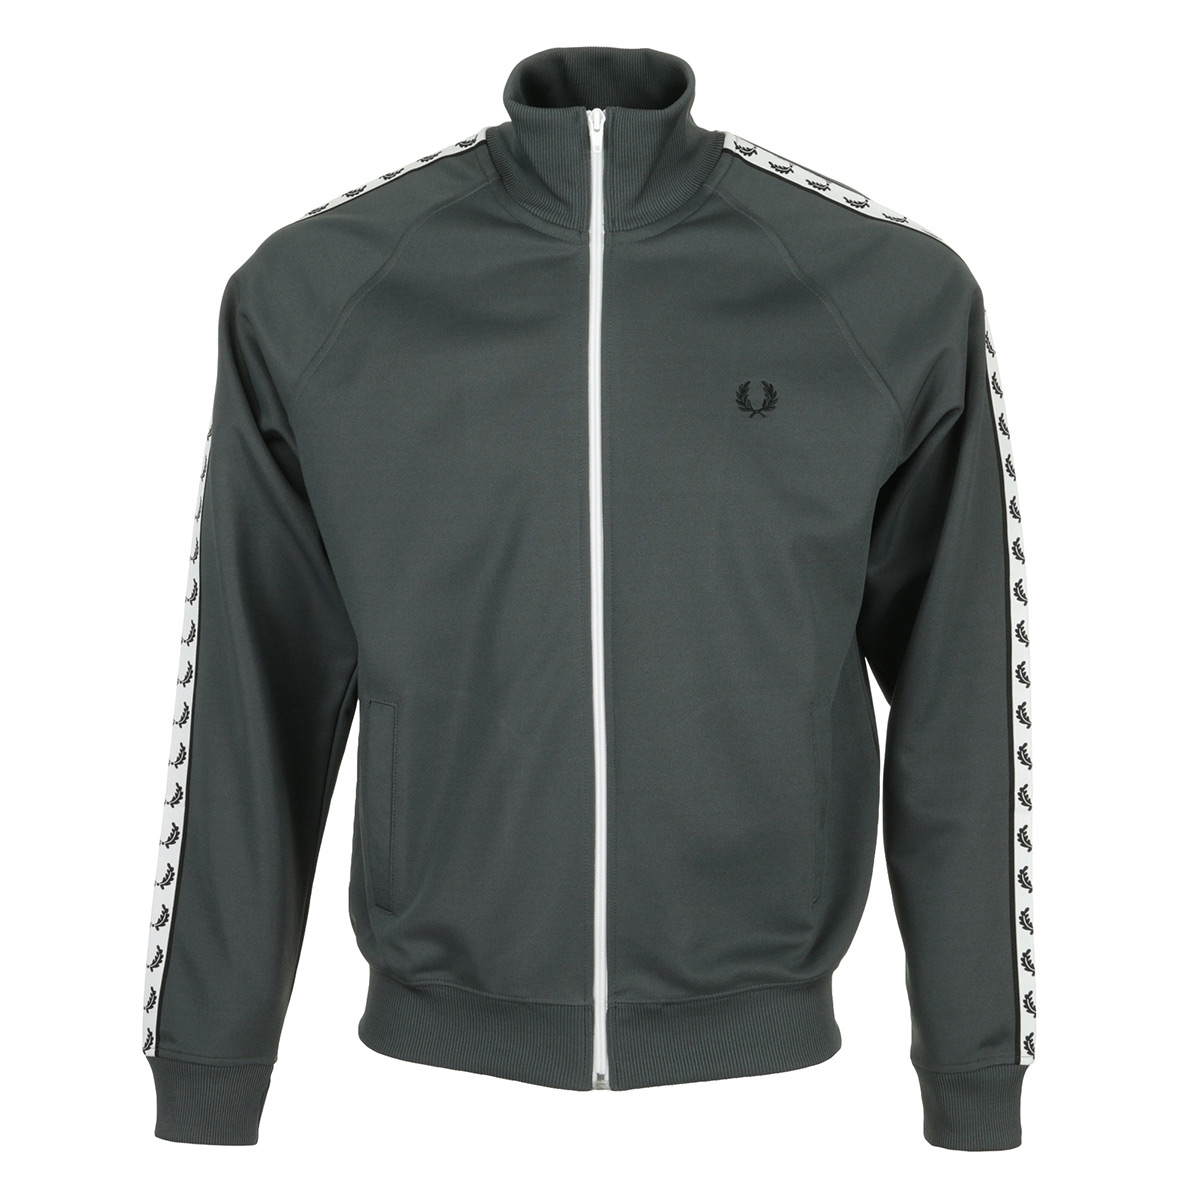 Fred Perry "Taped Track Jacket"